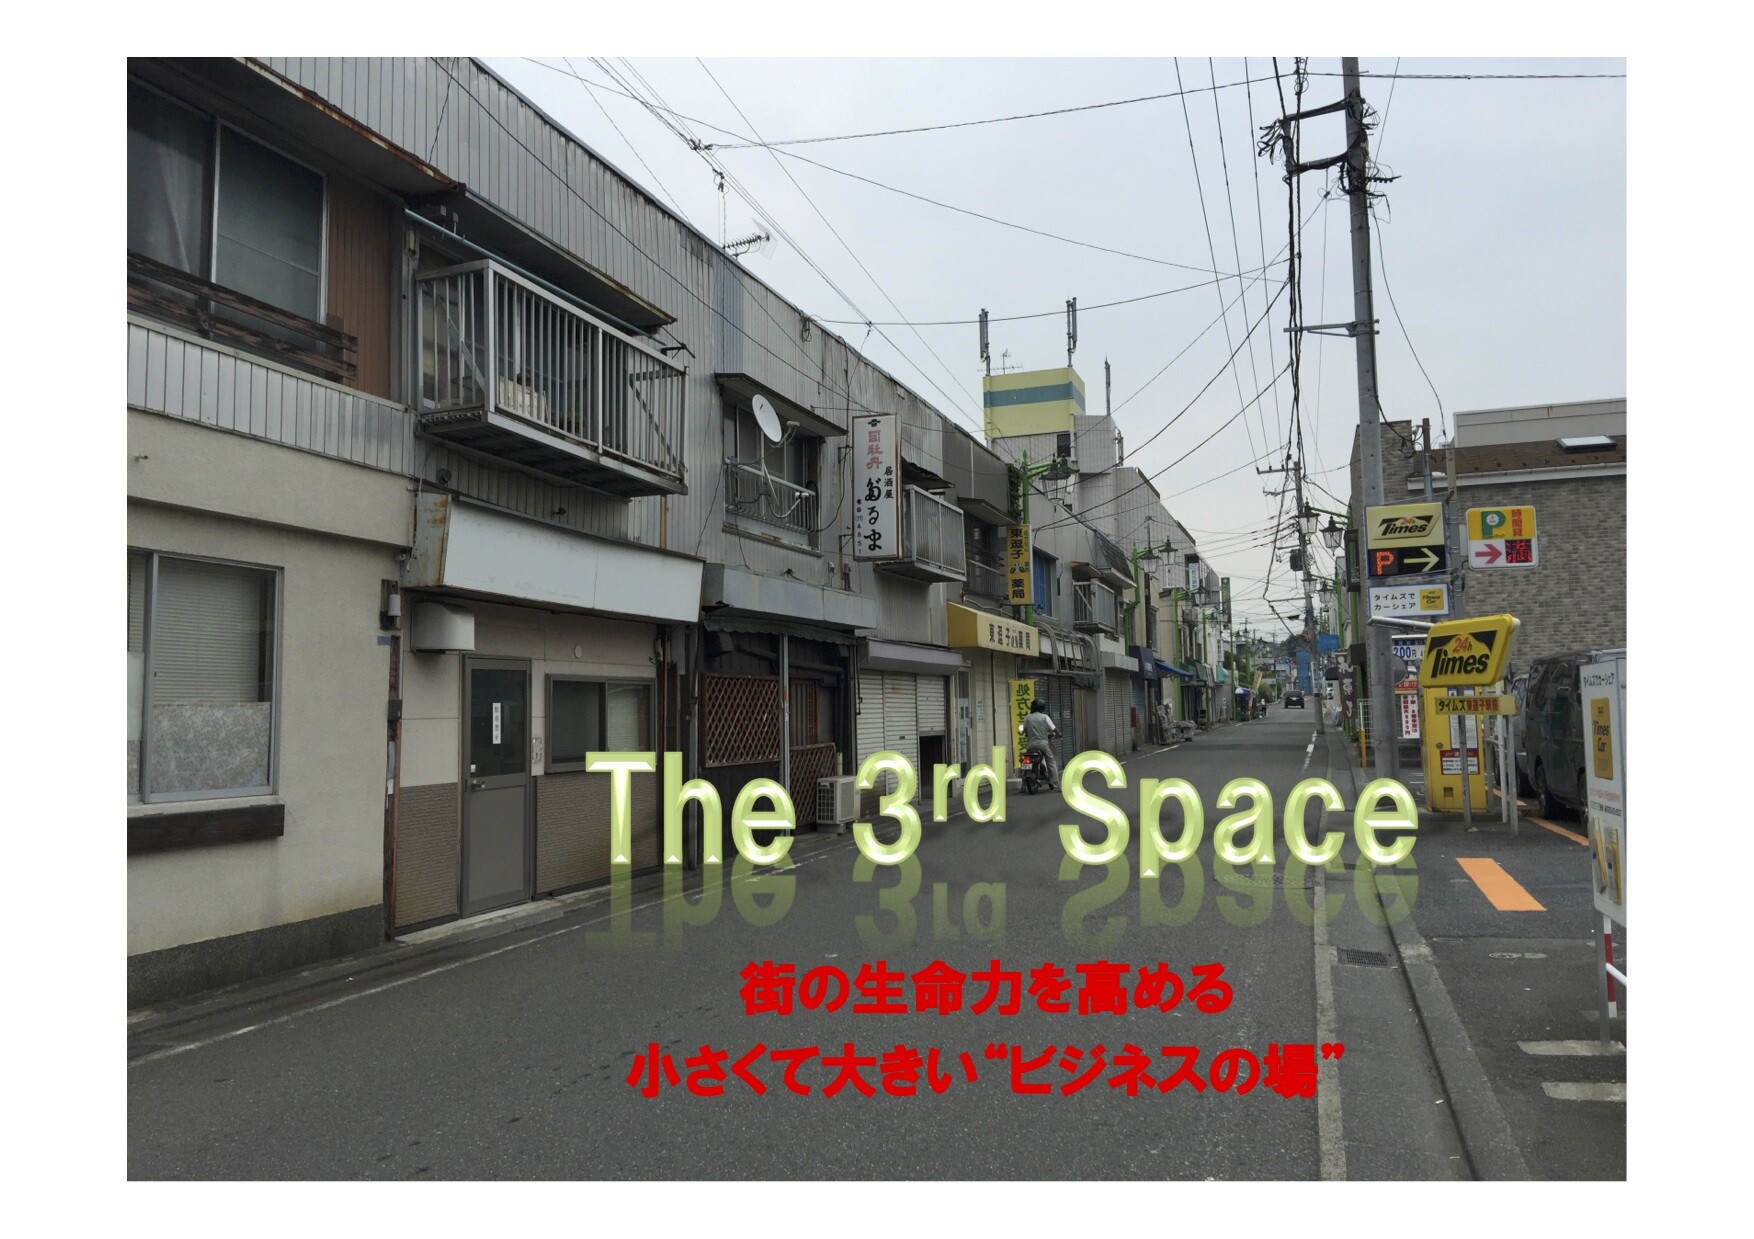 The 3rd Space Pj-0